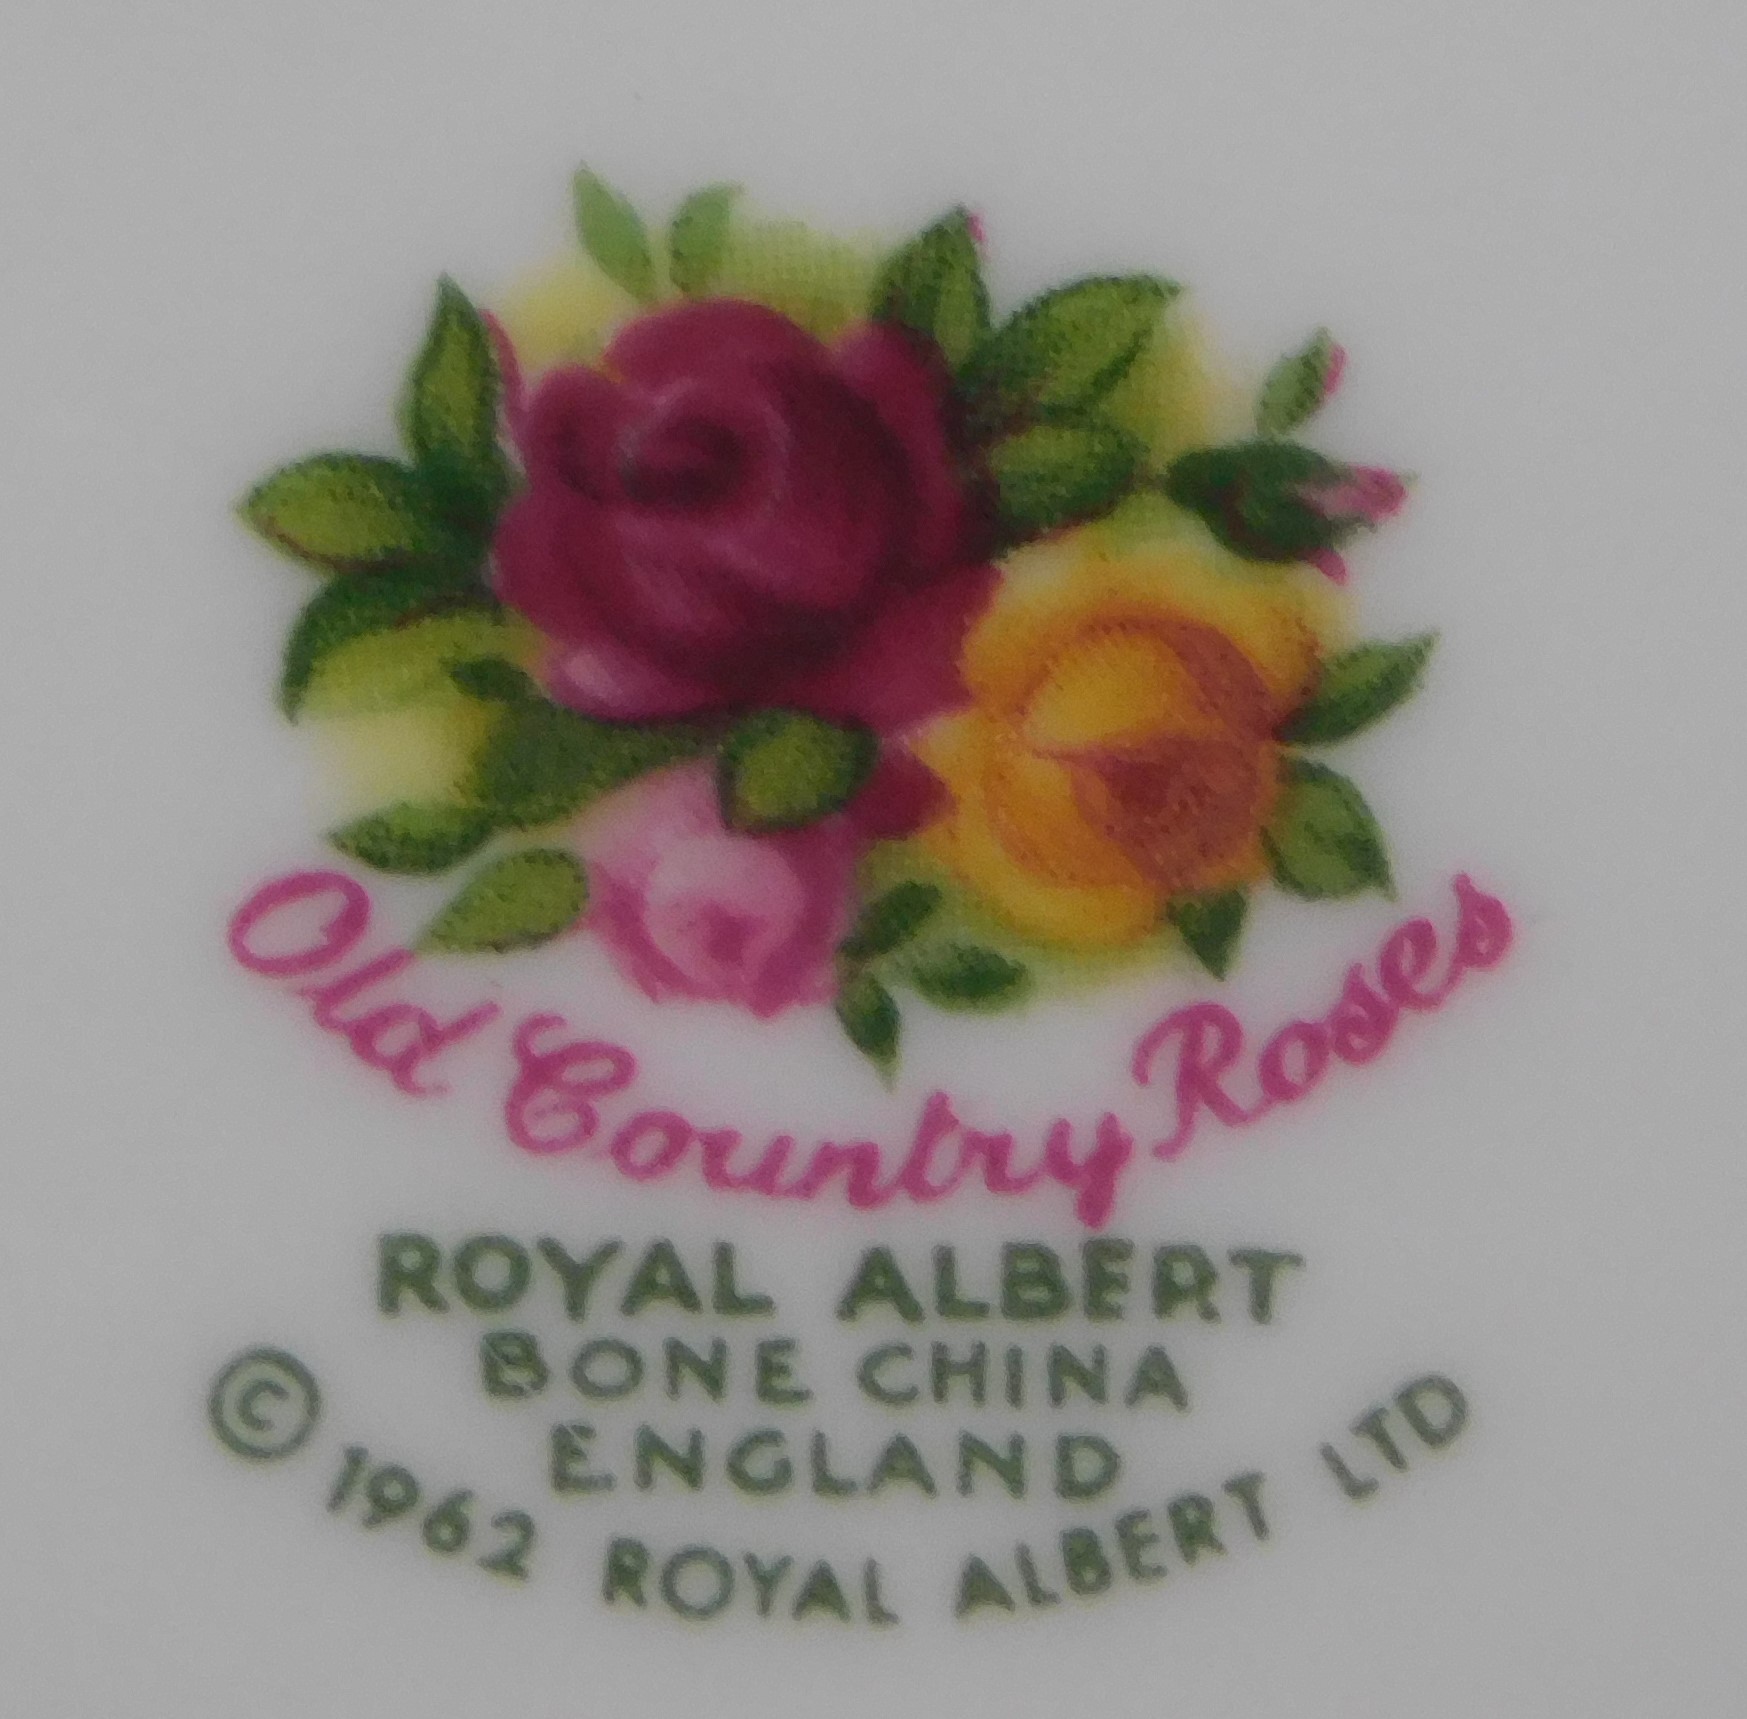 (2 ) Piece China Tea Set with Tray - and napkins (Matching) 'Old Country Roses' - 'Royal Albert' - Image 2 of 3